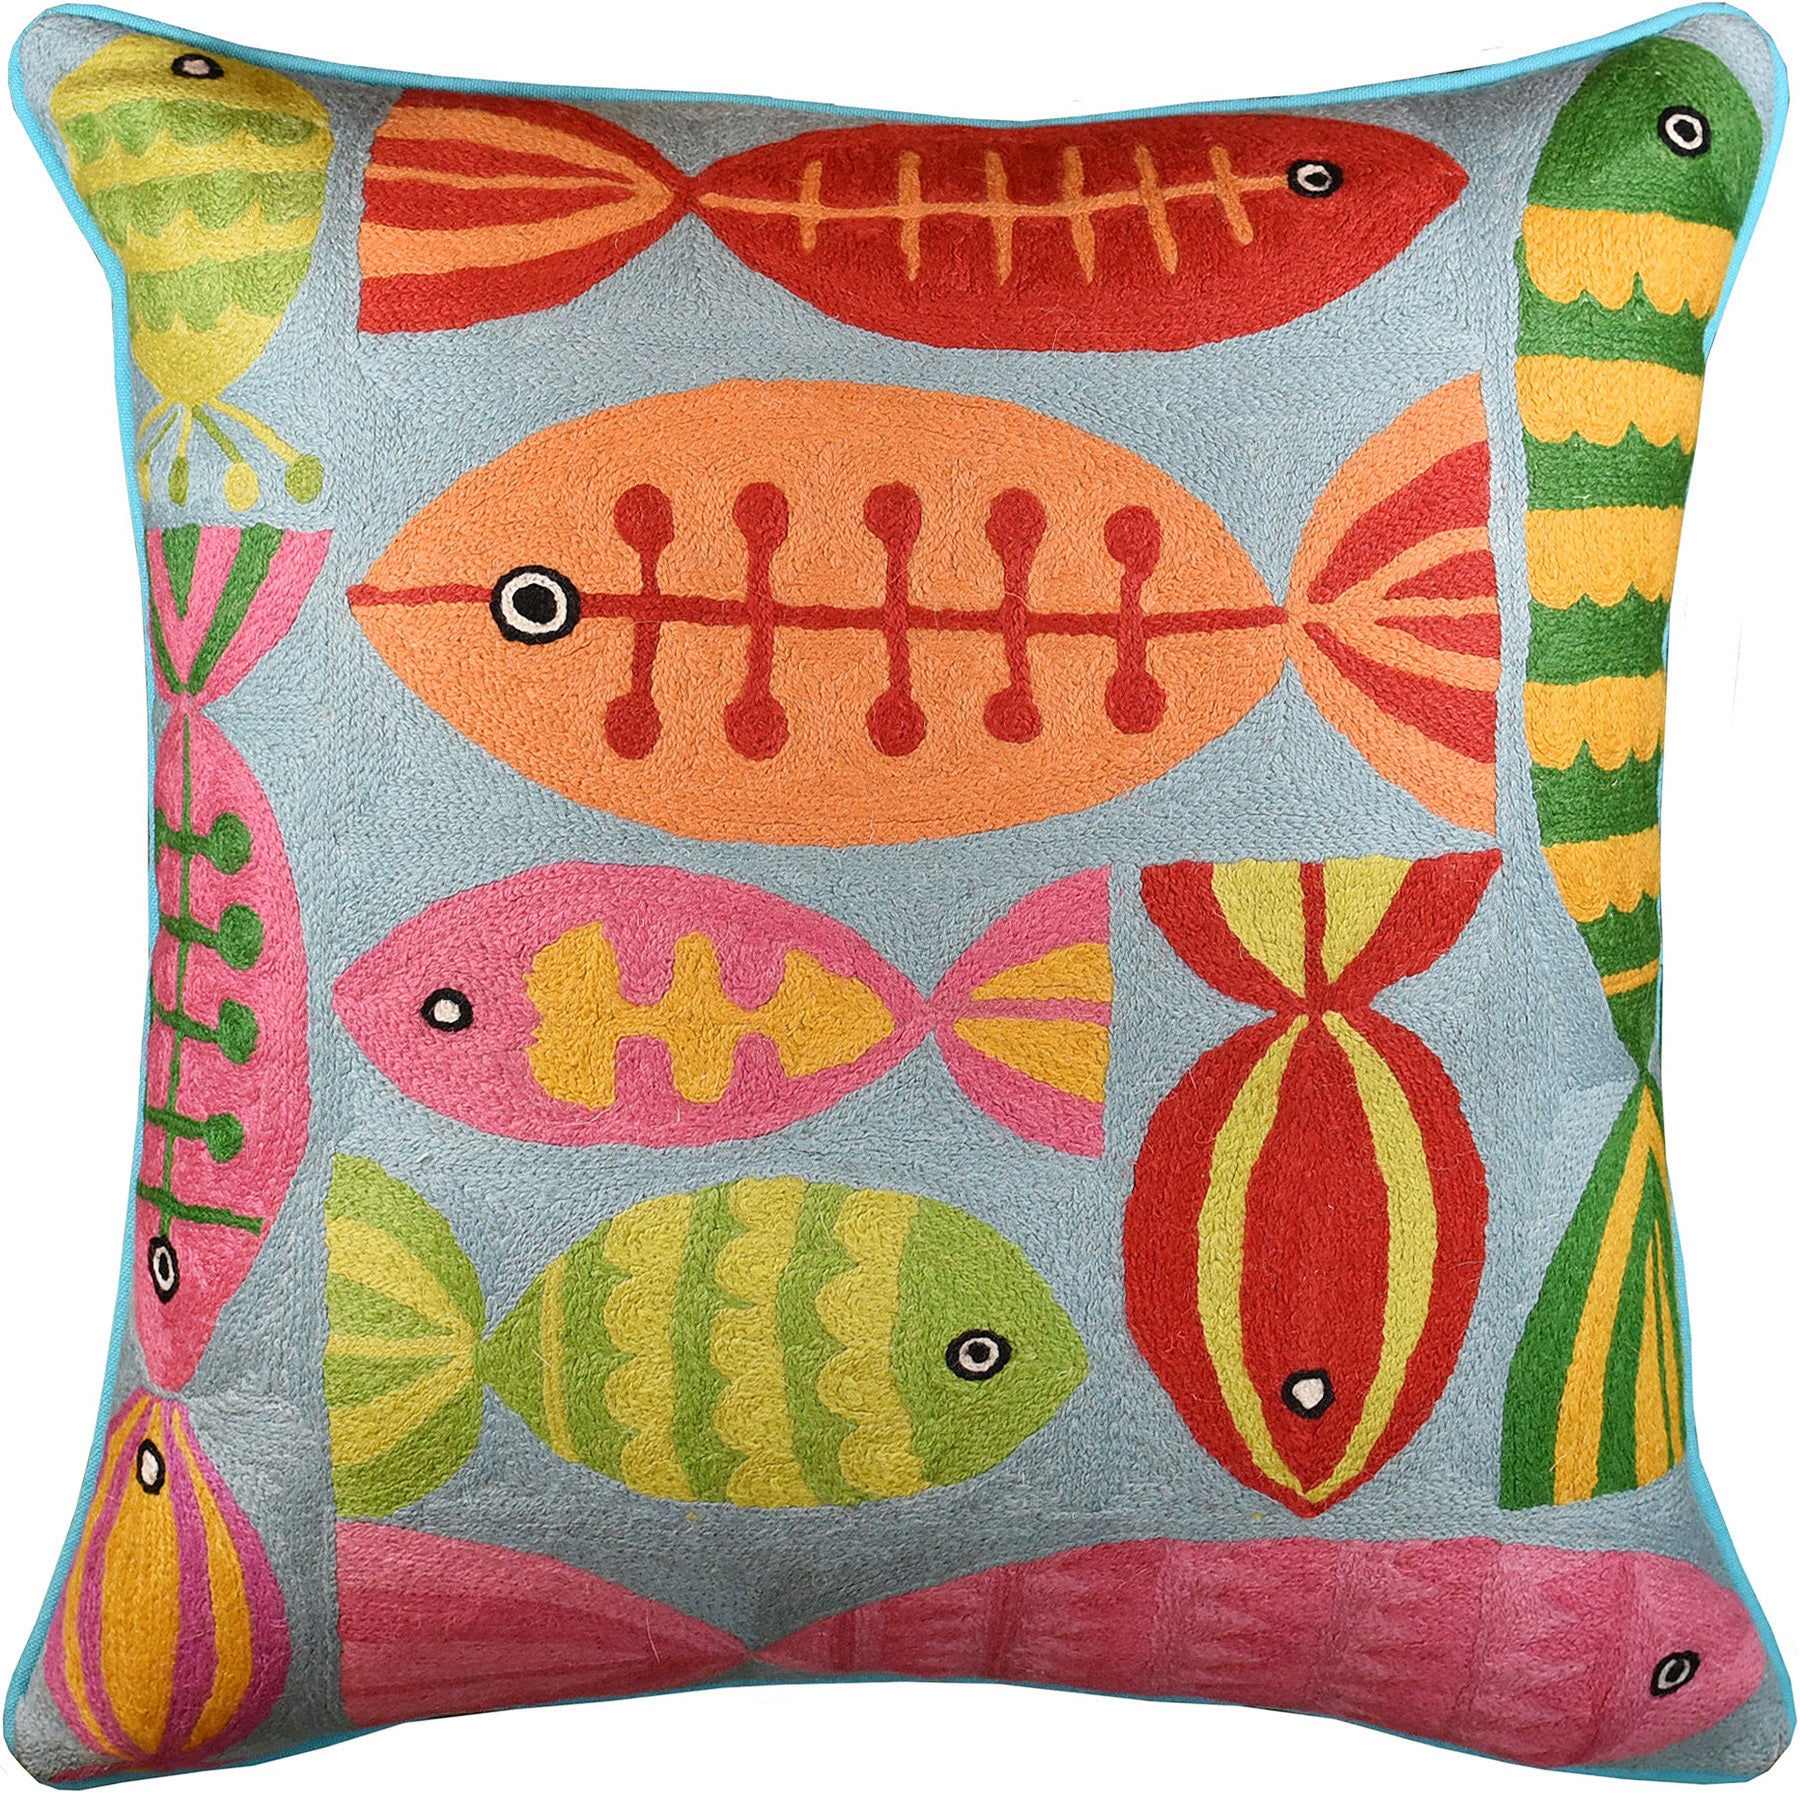 Decorative Fish Pillow Cover Hand Embroidered Wool 18 x 18 – Kashmir  Designs